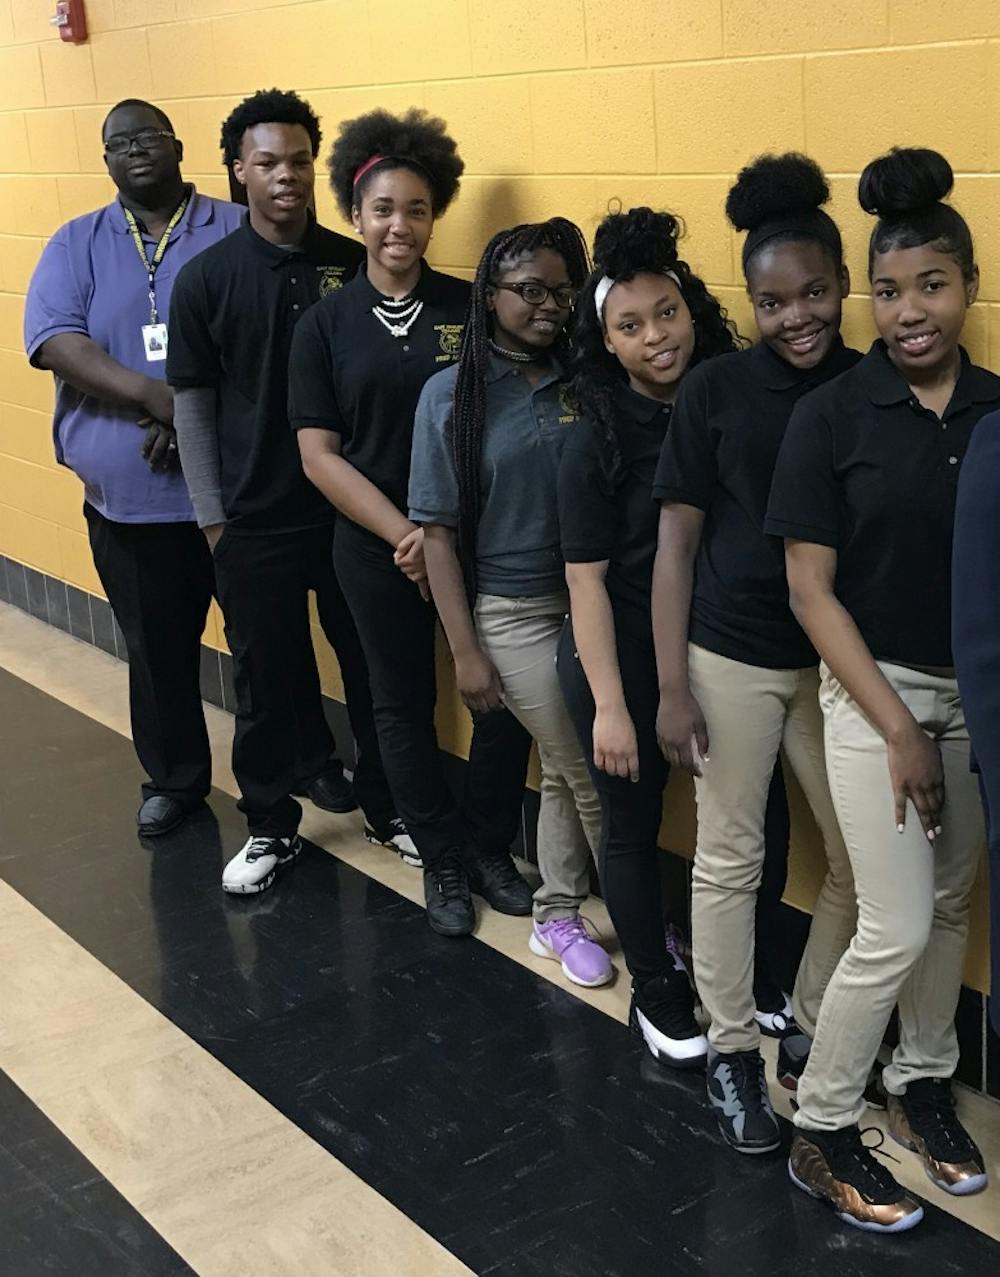 <p>Freshman Counselor Mr. Blanford pictured with students selected to attend Bucknell University Engineering Summer Camp: J’Von Williams, Isis Sherman, Lamesha Irving, Andrenae Rambus, Antinia McKinney and Rachel Latham.</p>